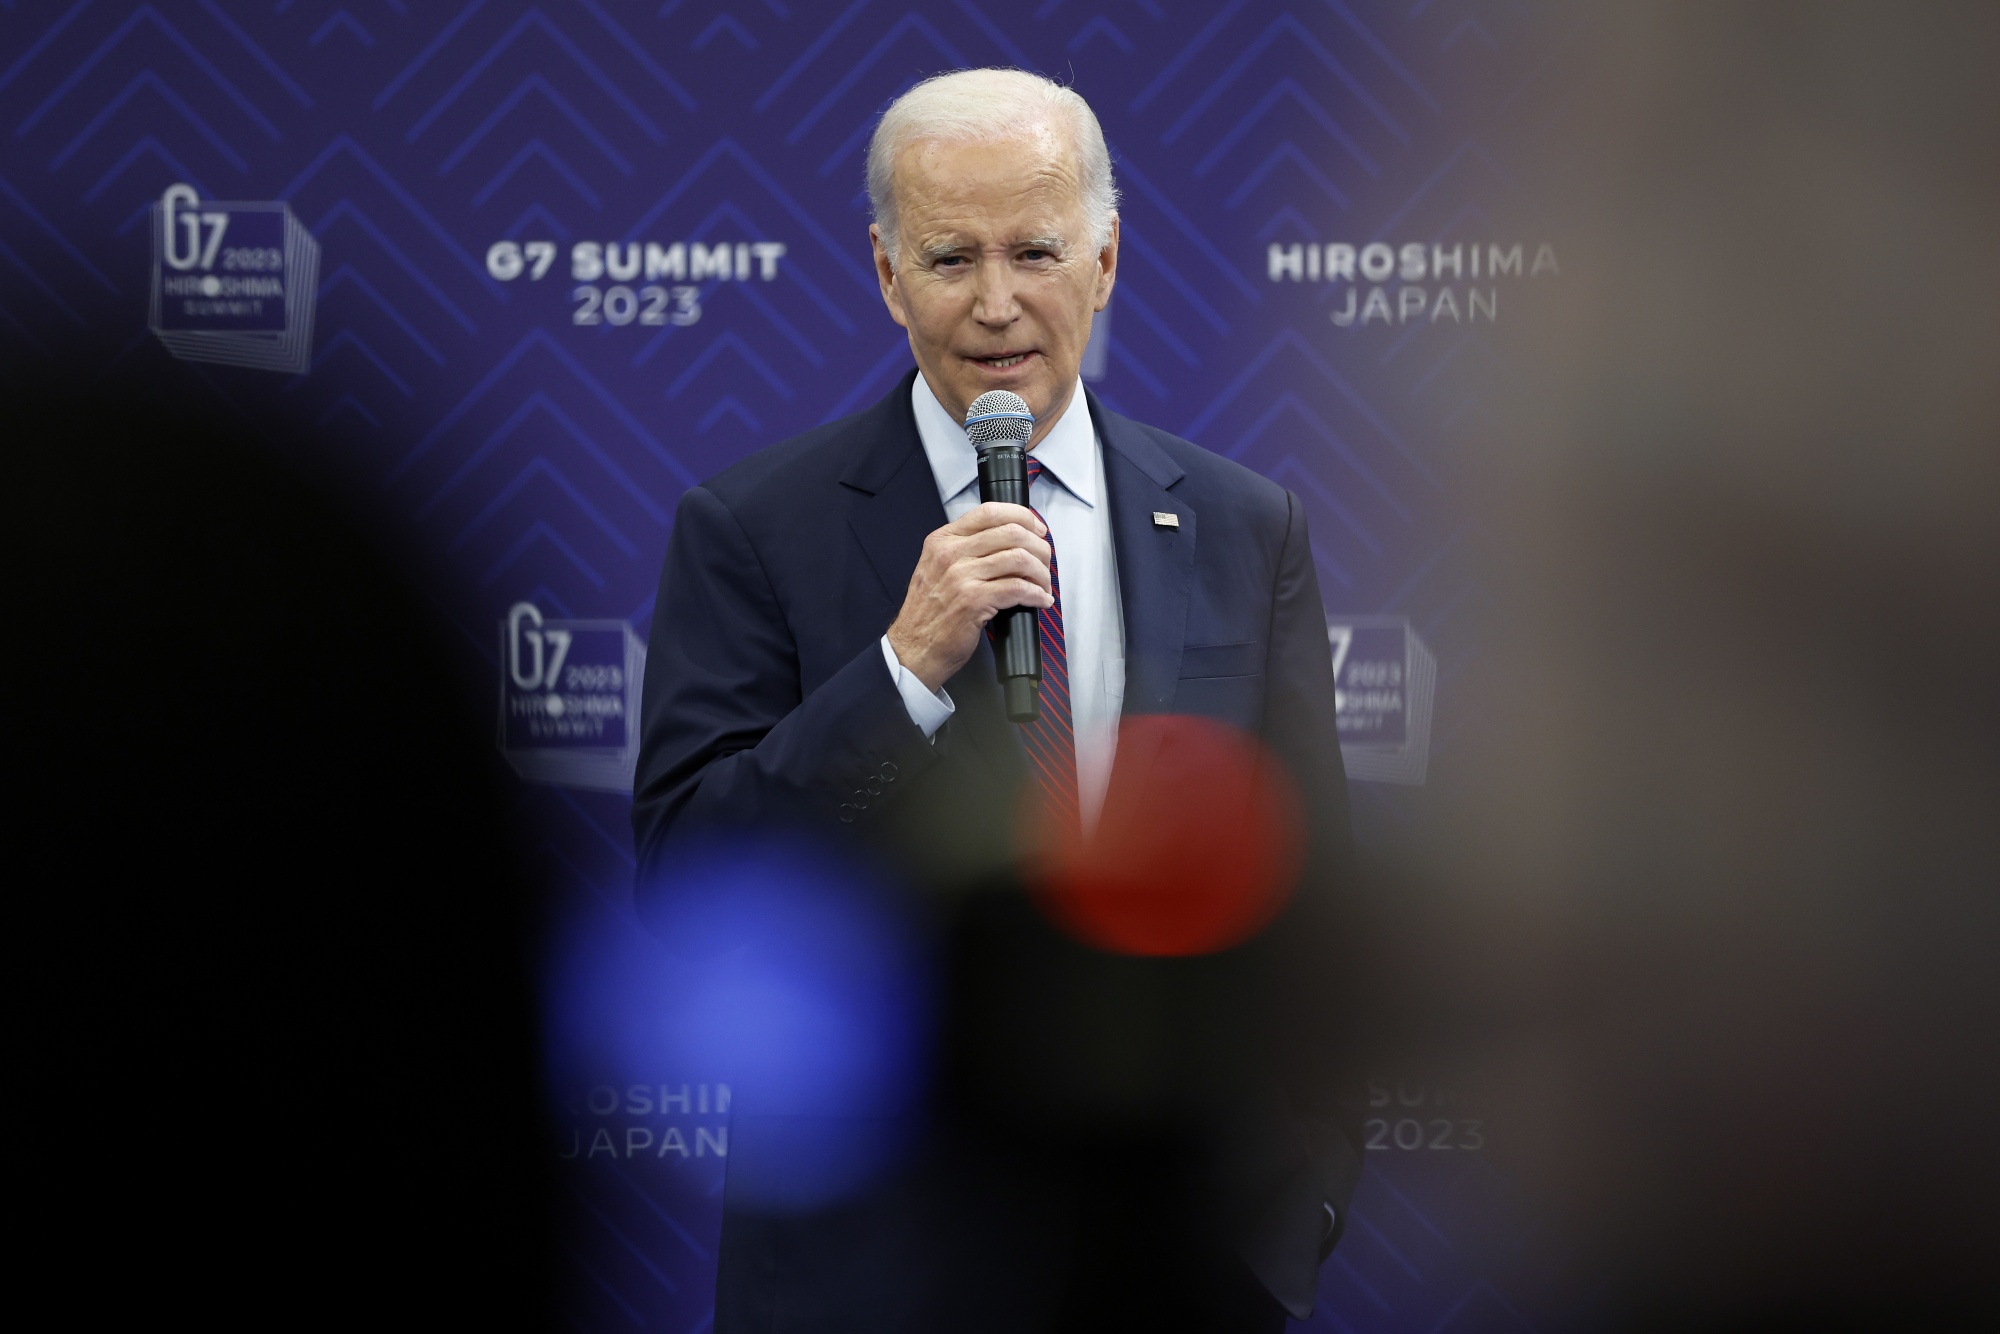 US President Joe Biden speaks during a news conference following the Group of Seven (G-7) leaders summit in Hiroshima, Japan, on Sunday, May 21, 2023.